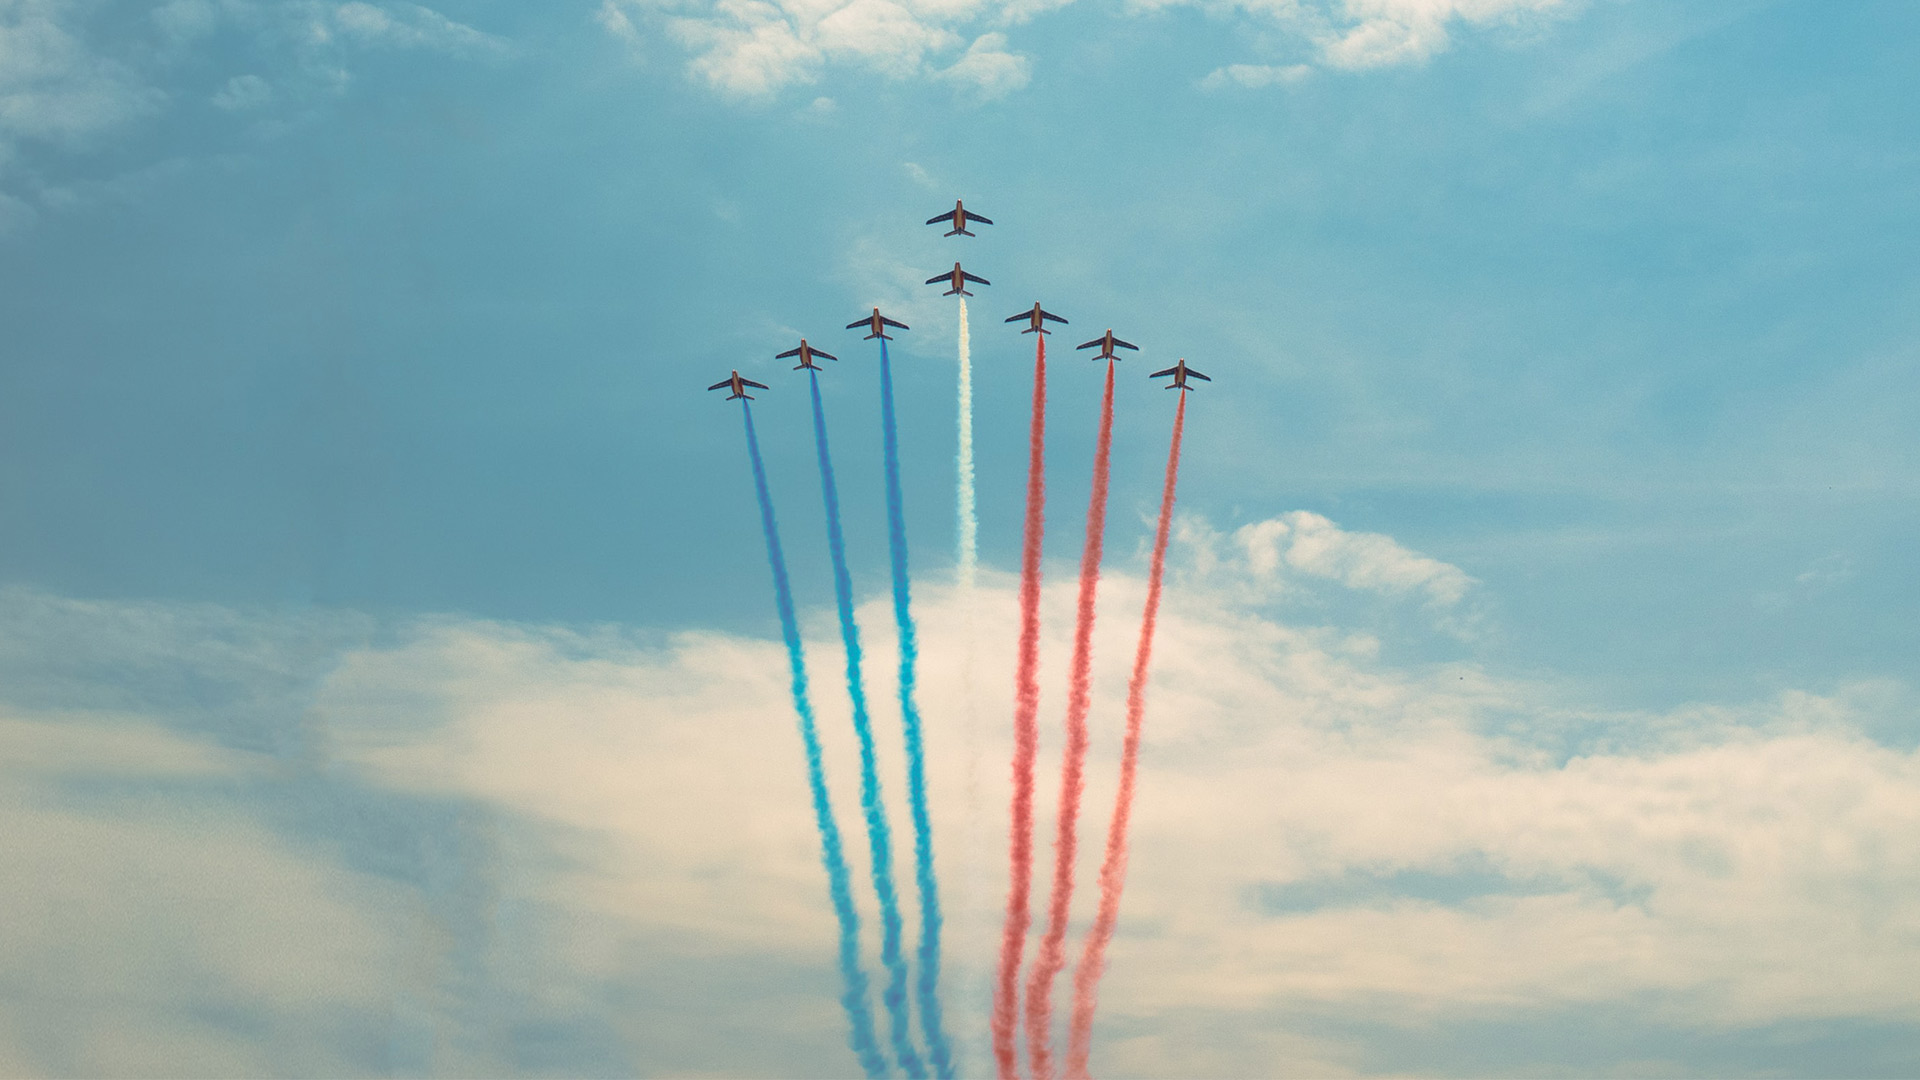 Le Mans Racing Airshow - MAT Foundry